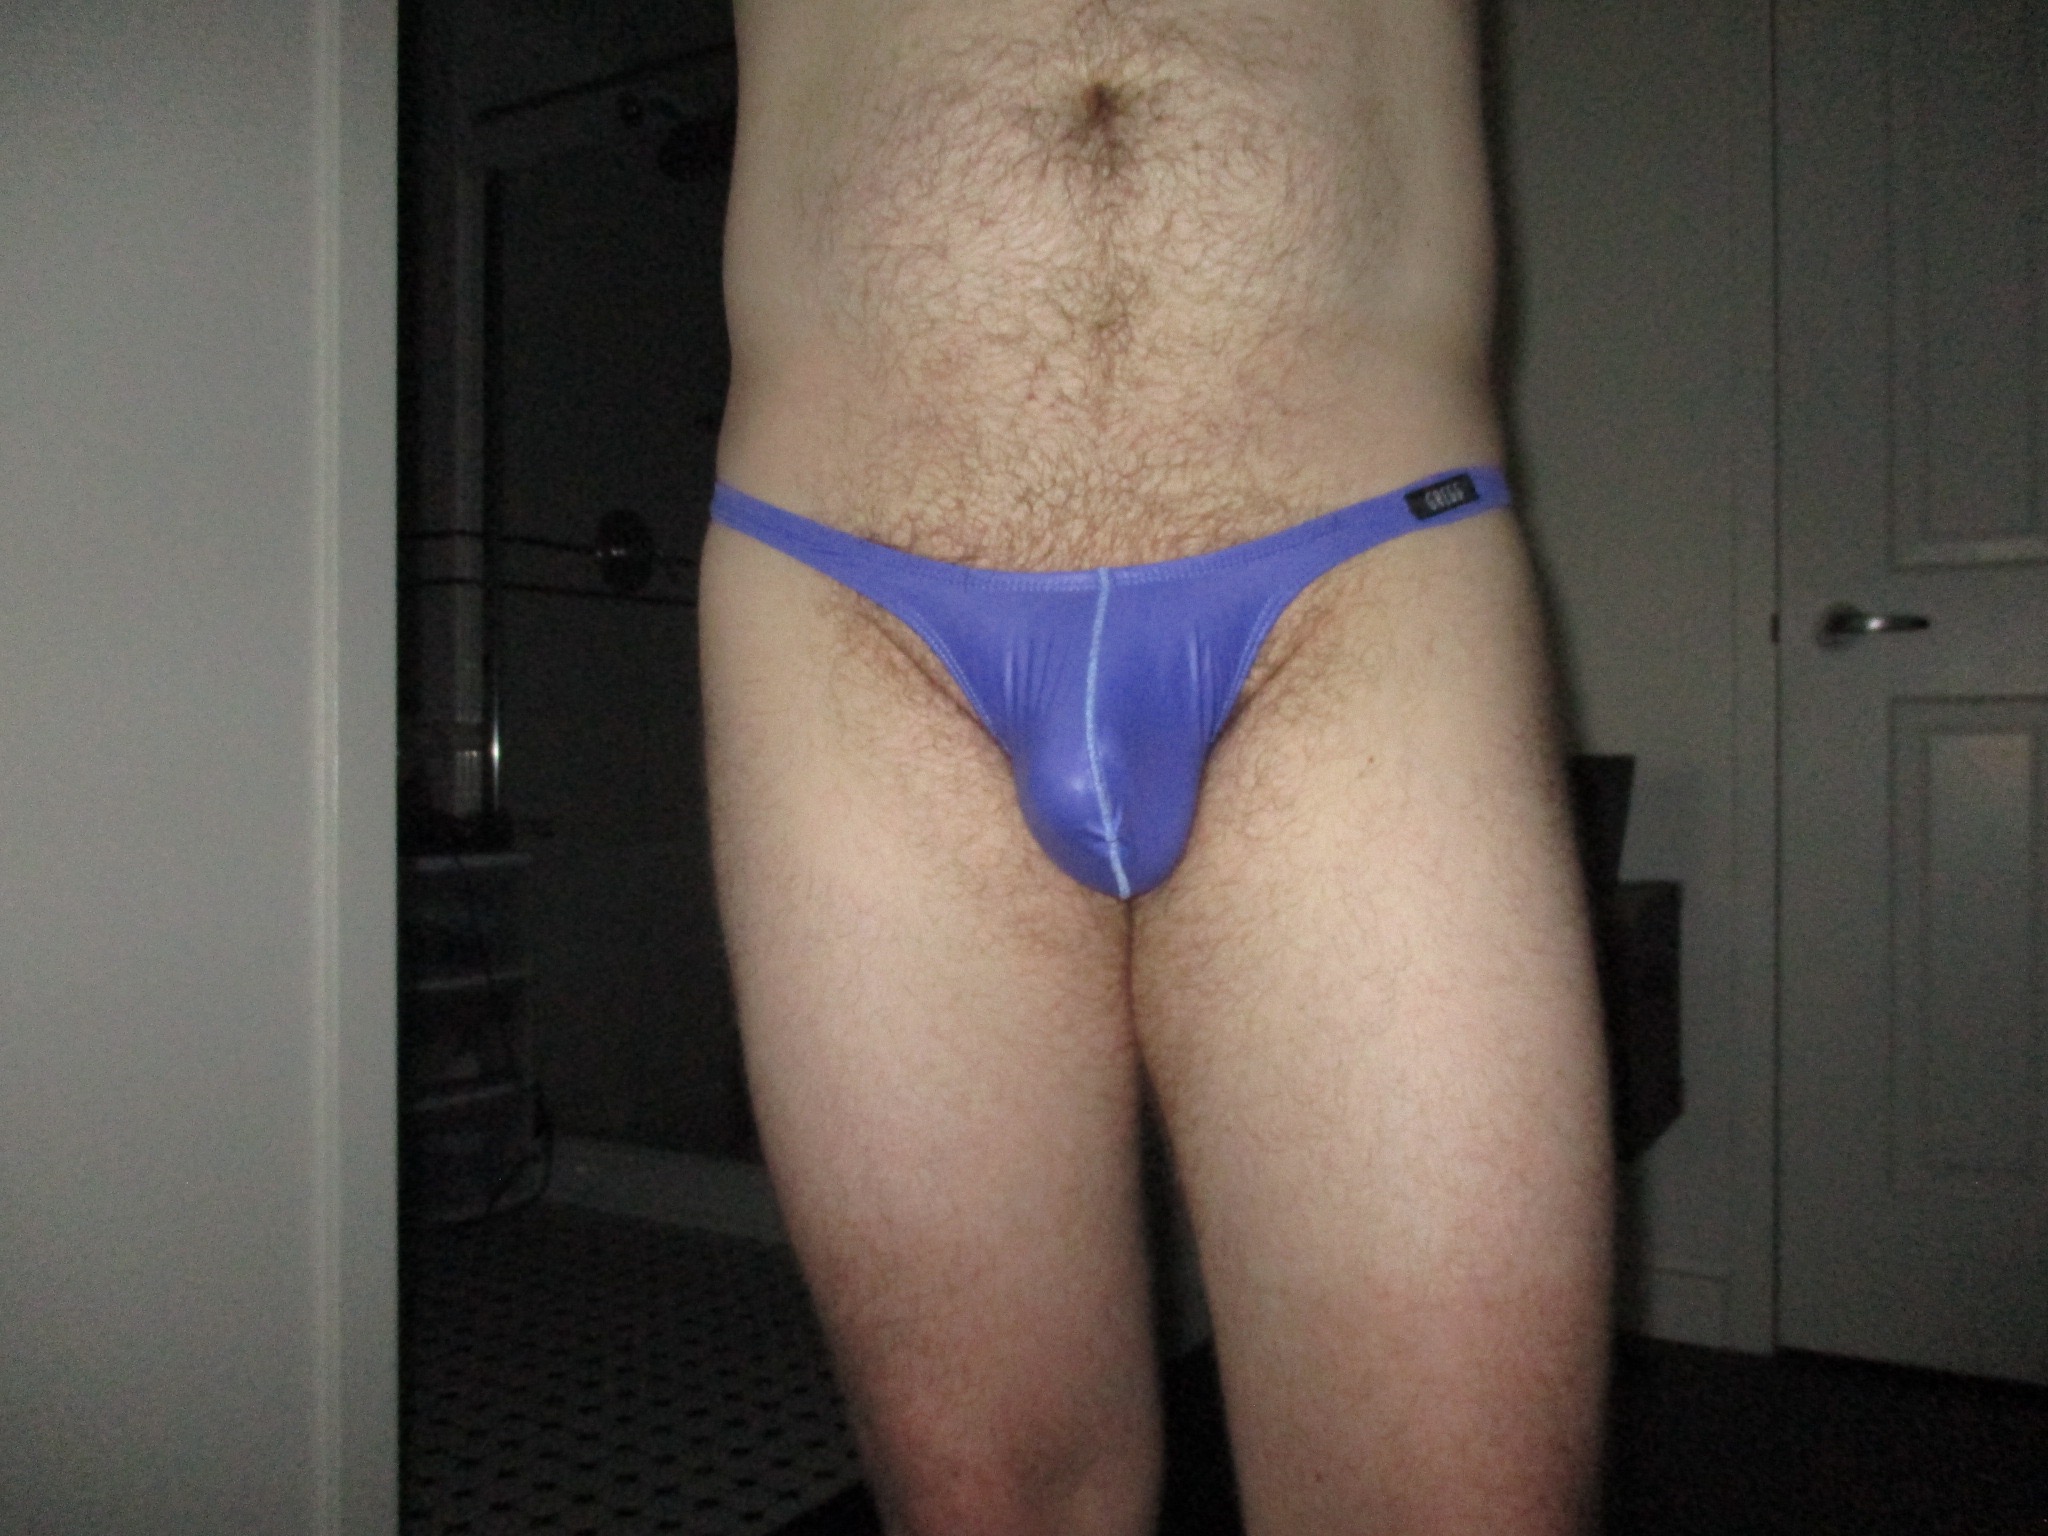 Rocking the Gregg Homme thong for this #thongthursday